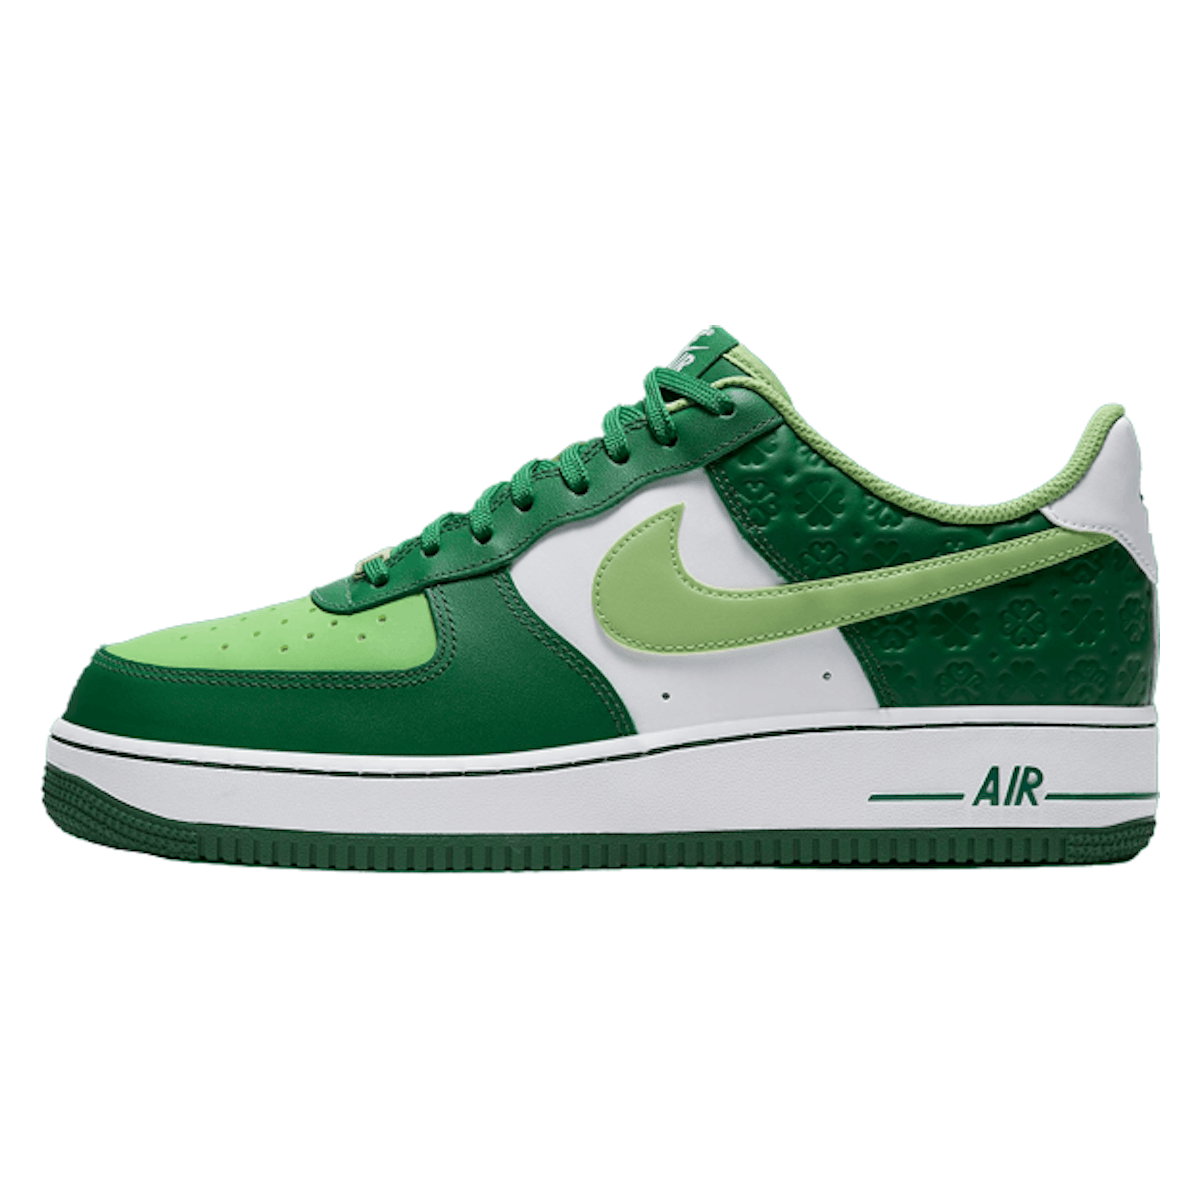 Nike Air Force 1 '07 "St. Patty's Day"